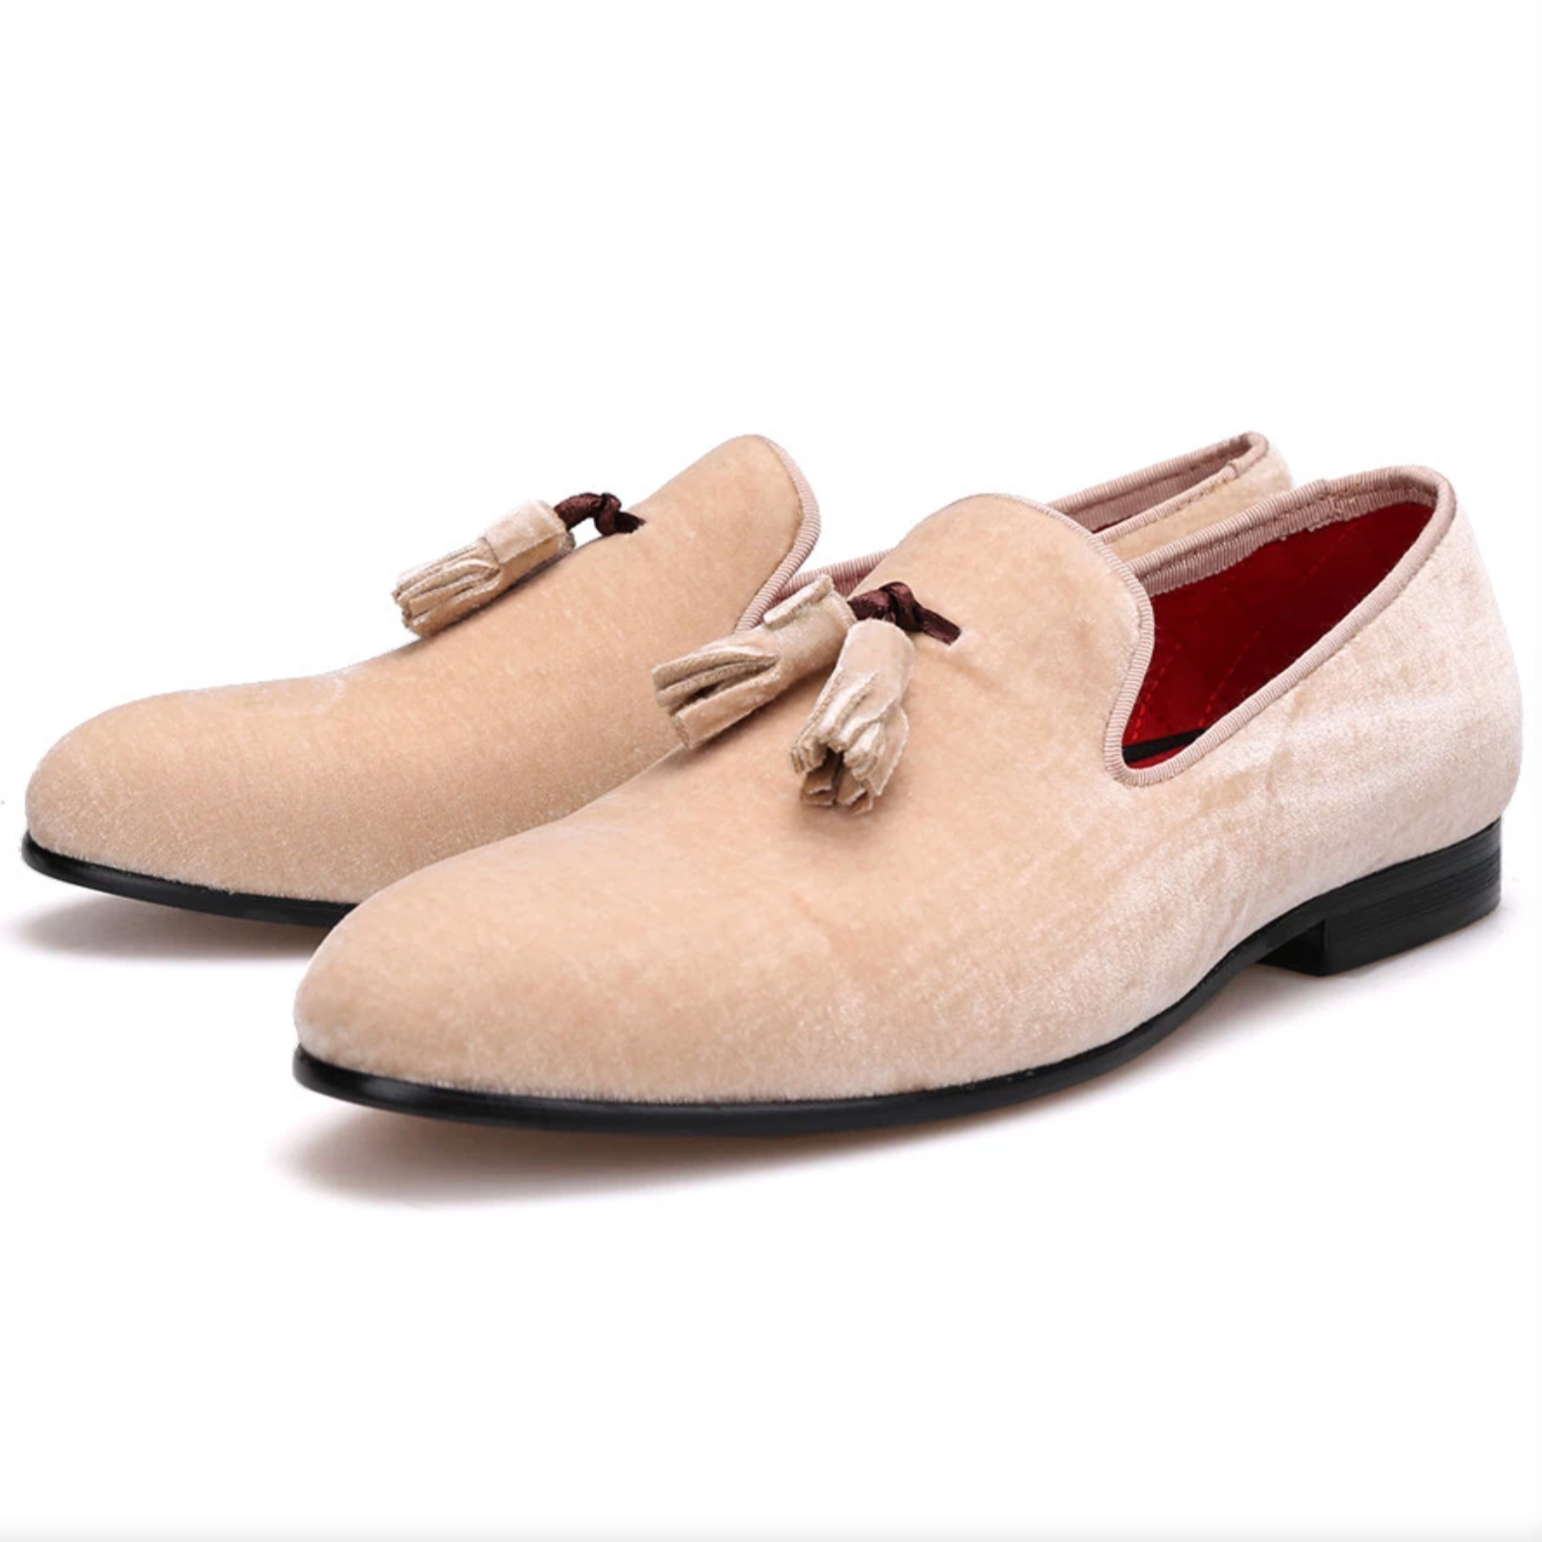 Ivory-white tasselled loafers with a plush red quilted lining. 